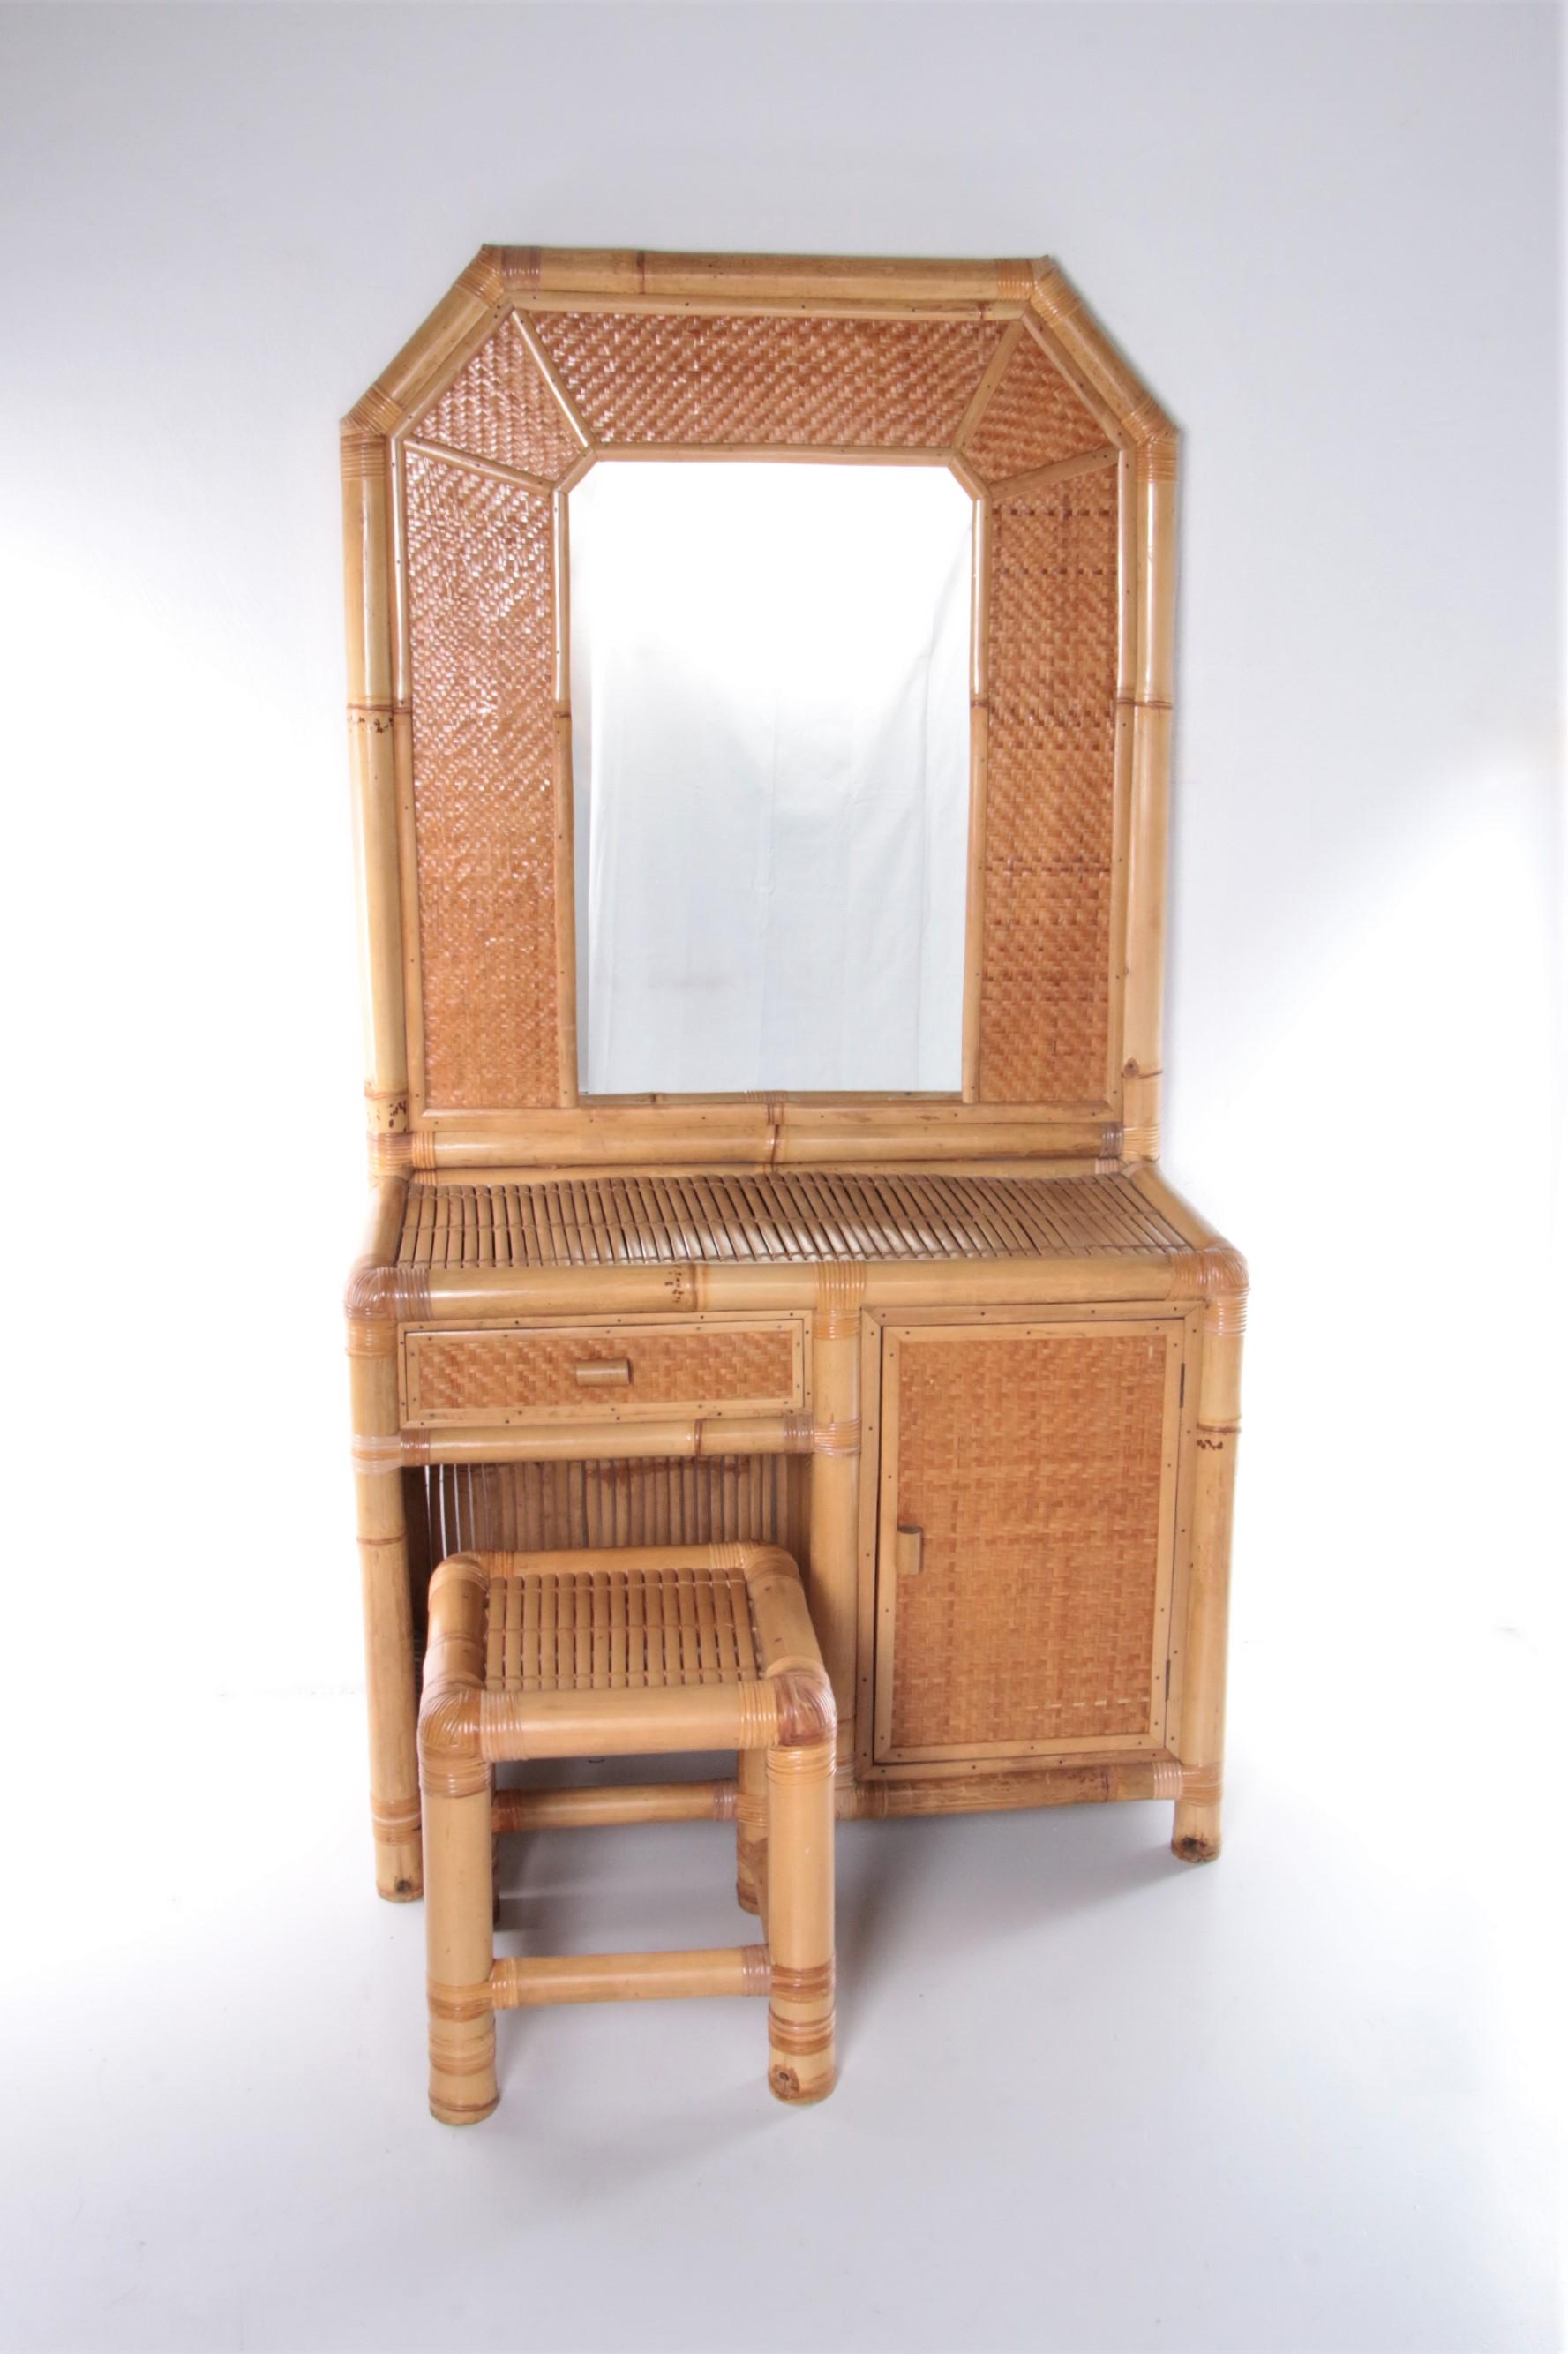 Vintage faux bamboo dressing table 'natural beauty' 1980s France.

 Groom yourself in style with this very unique faux bamboo dressing table

Who wouldn't want these in the bedroom. Country of origin: France. Period: 1980s. This special item has an